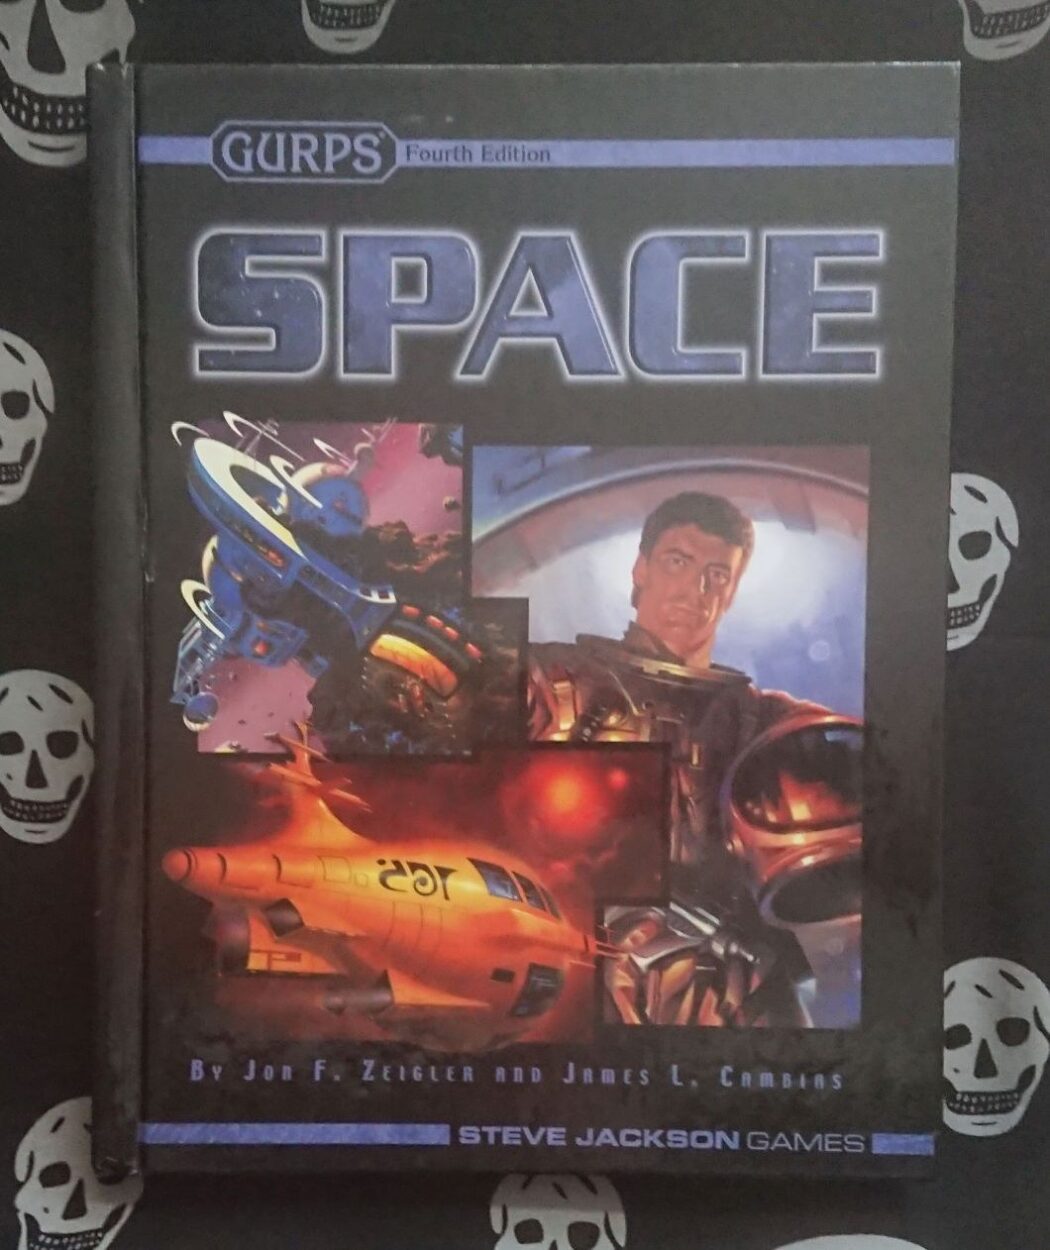 GURPS 4th ed SPACE cover